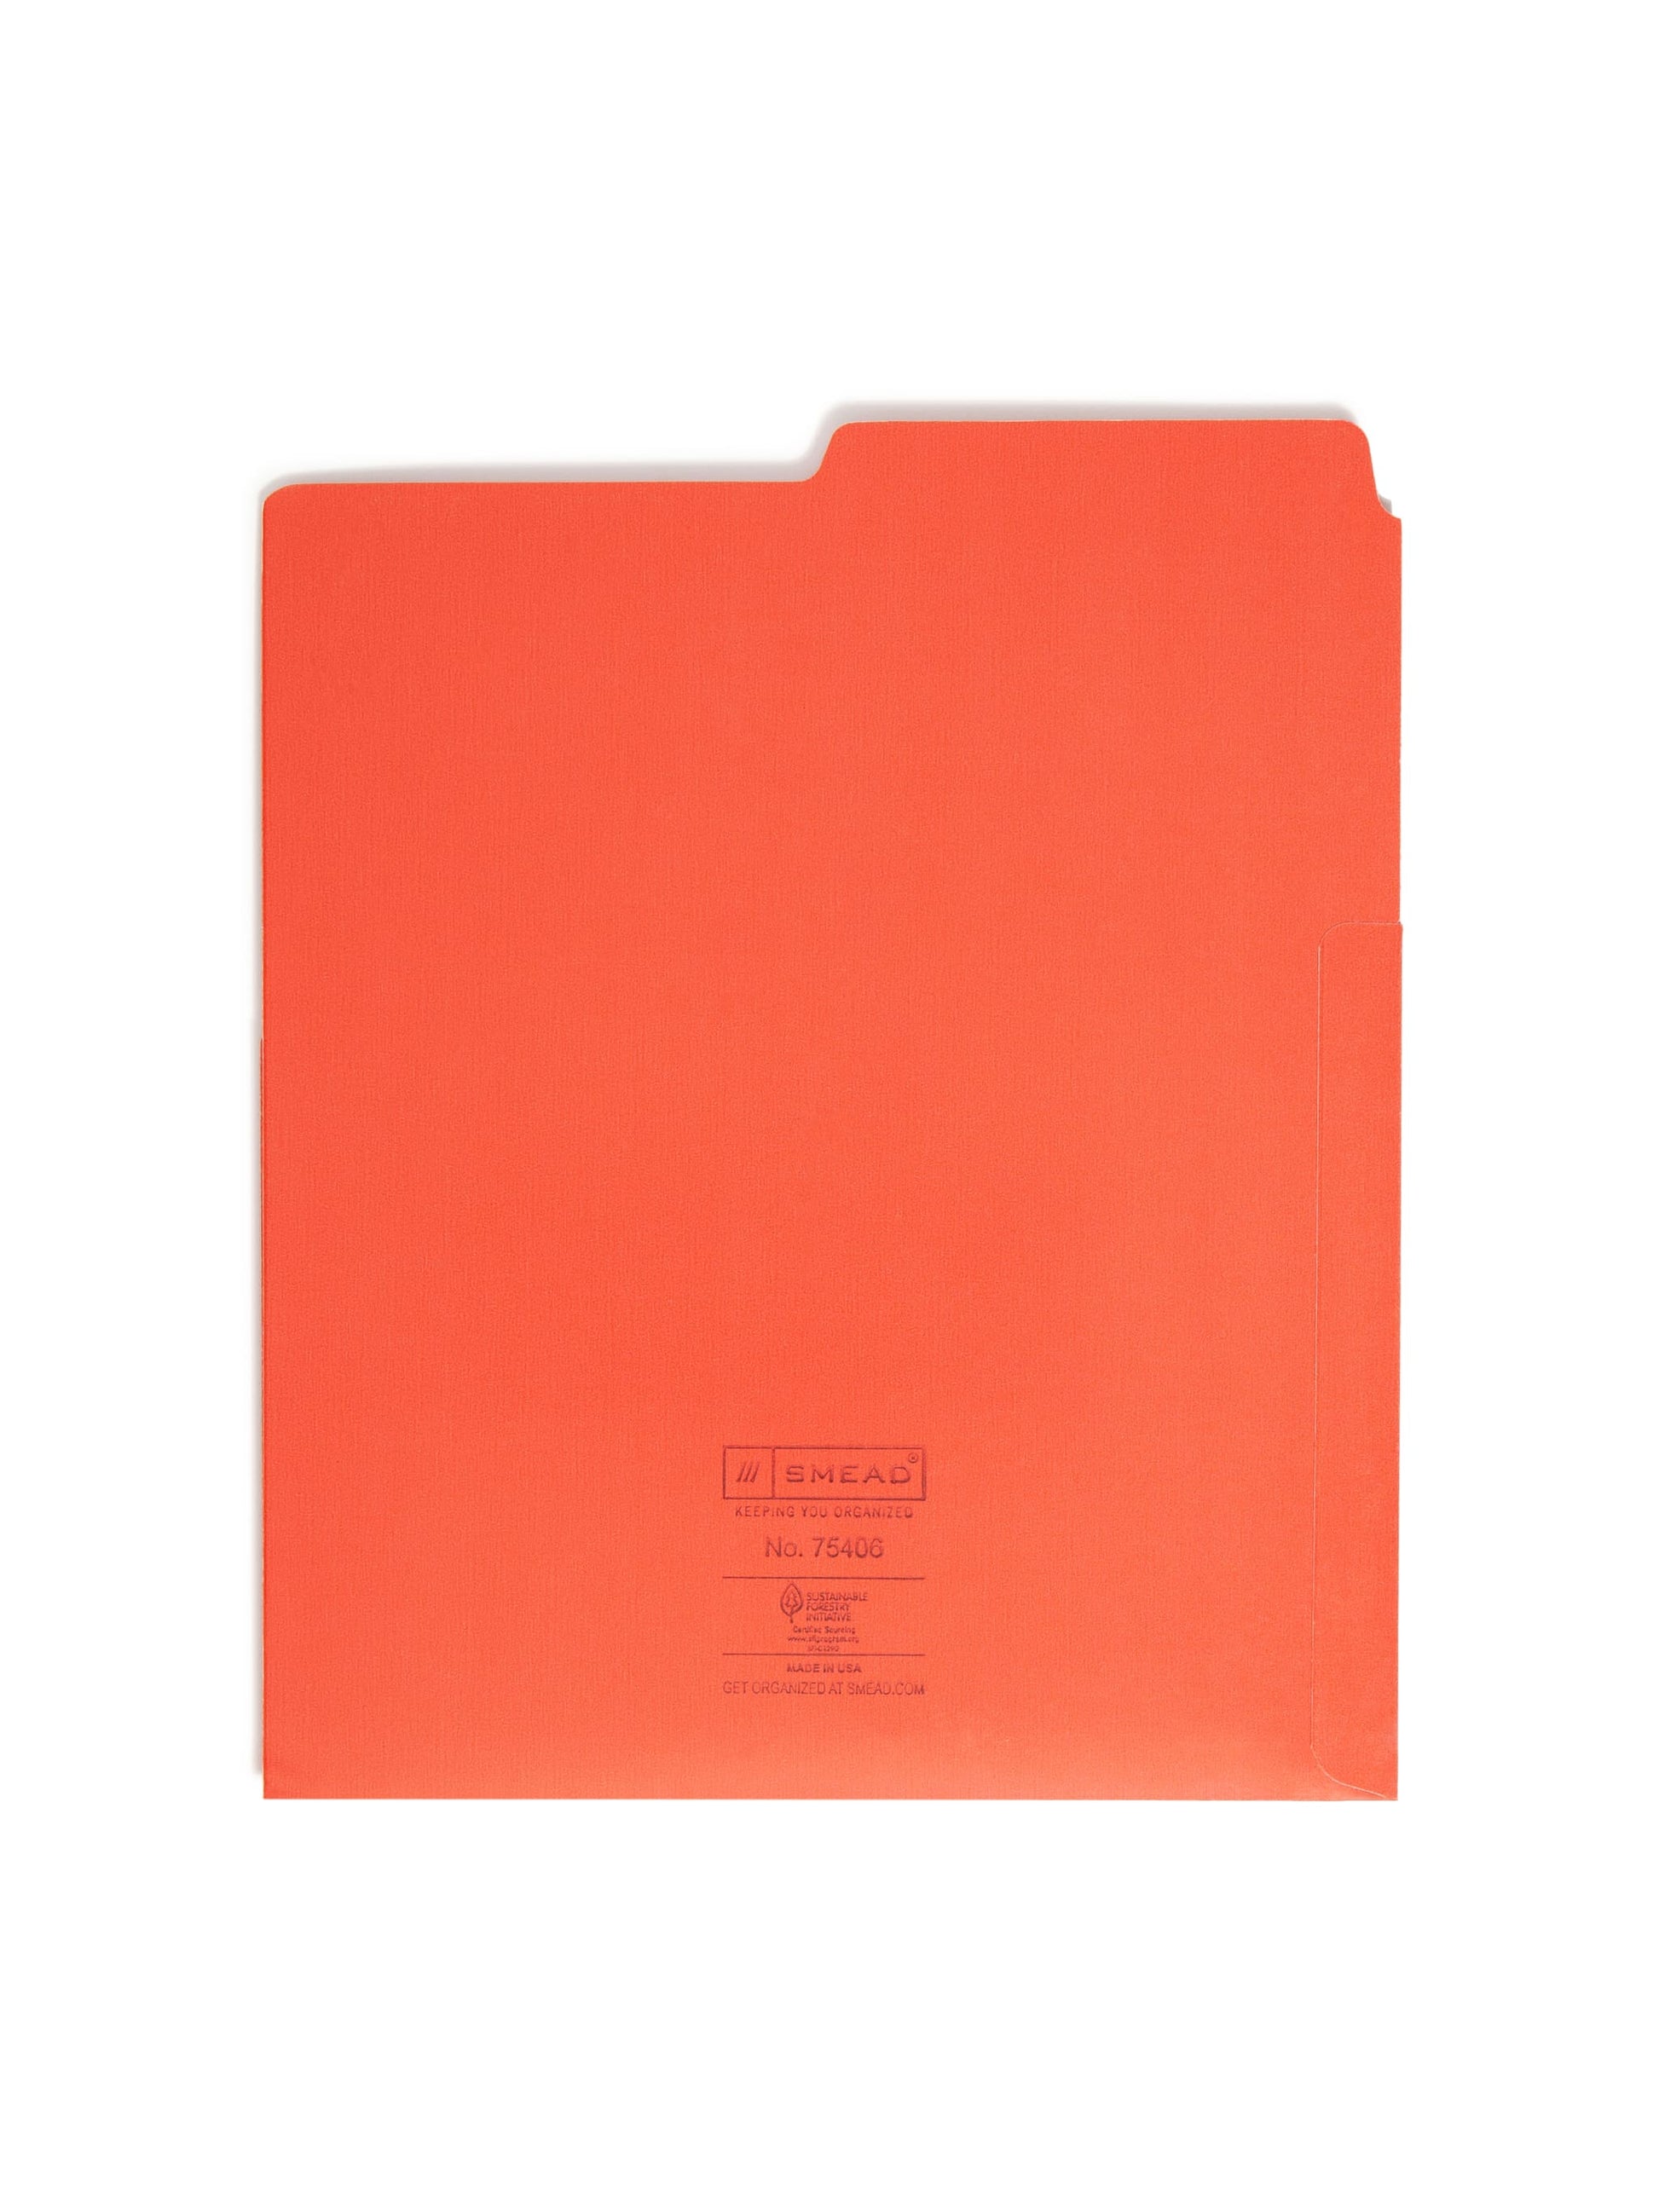 Heavyweight Vertical File Folder, Assorted Colors Color, Letter Size, Set of 1, 086486754064